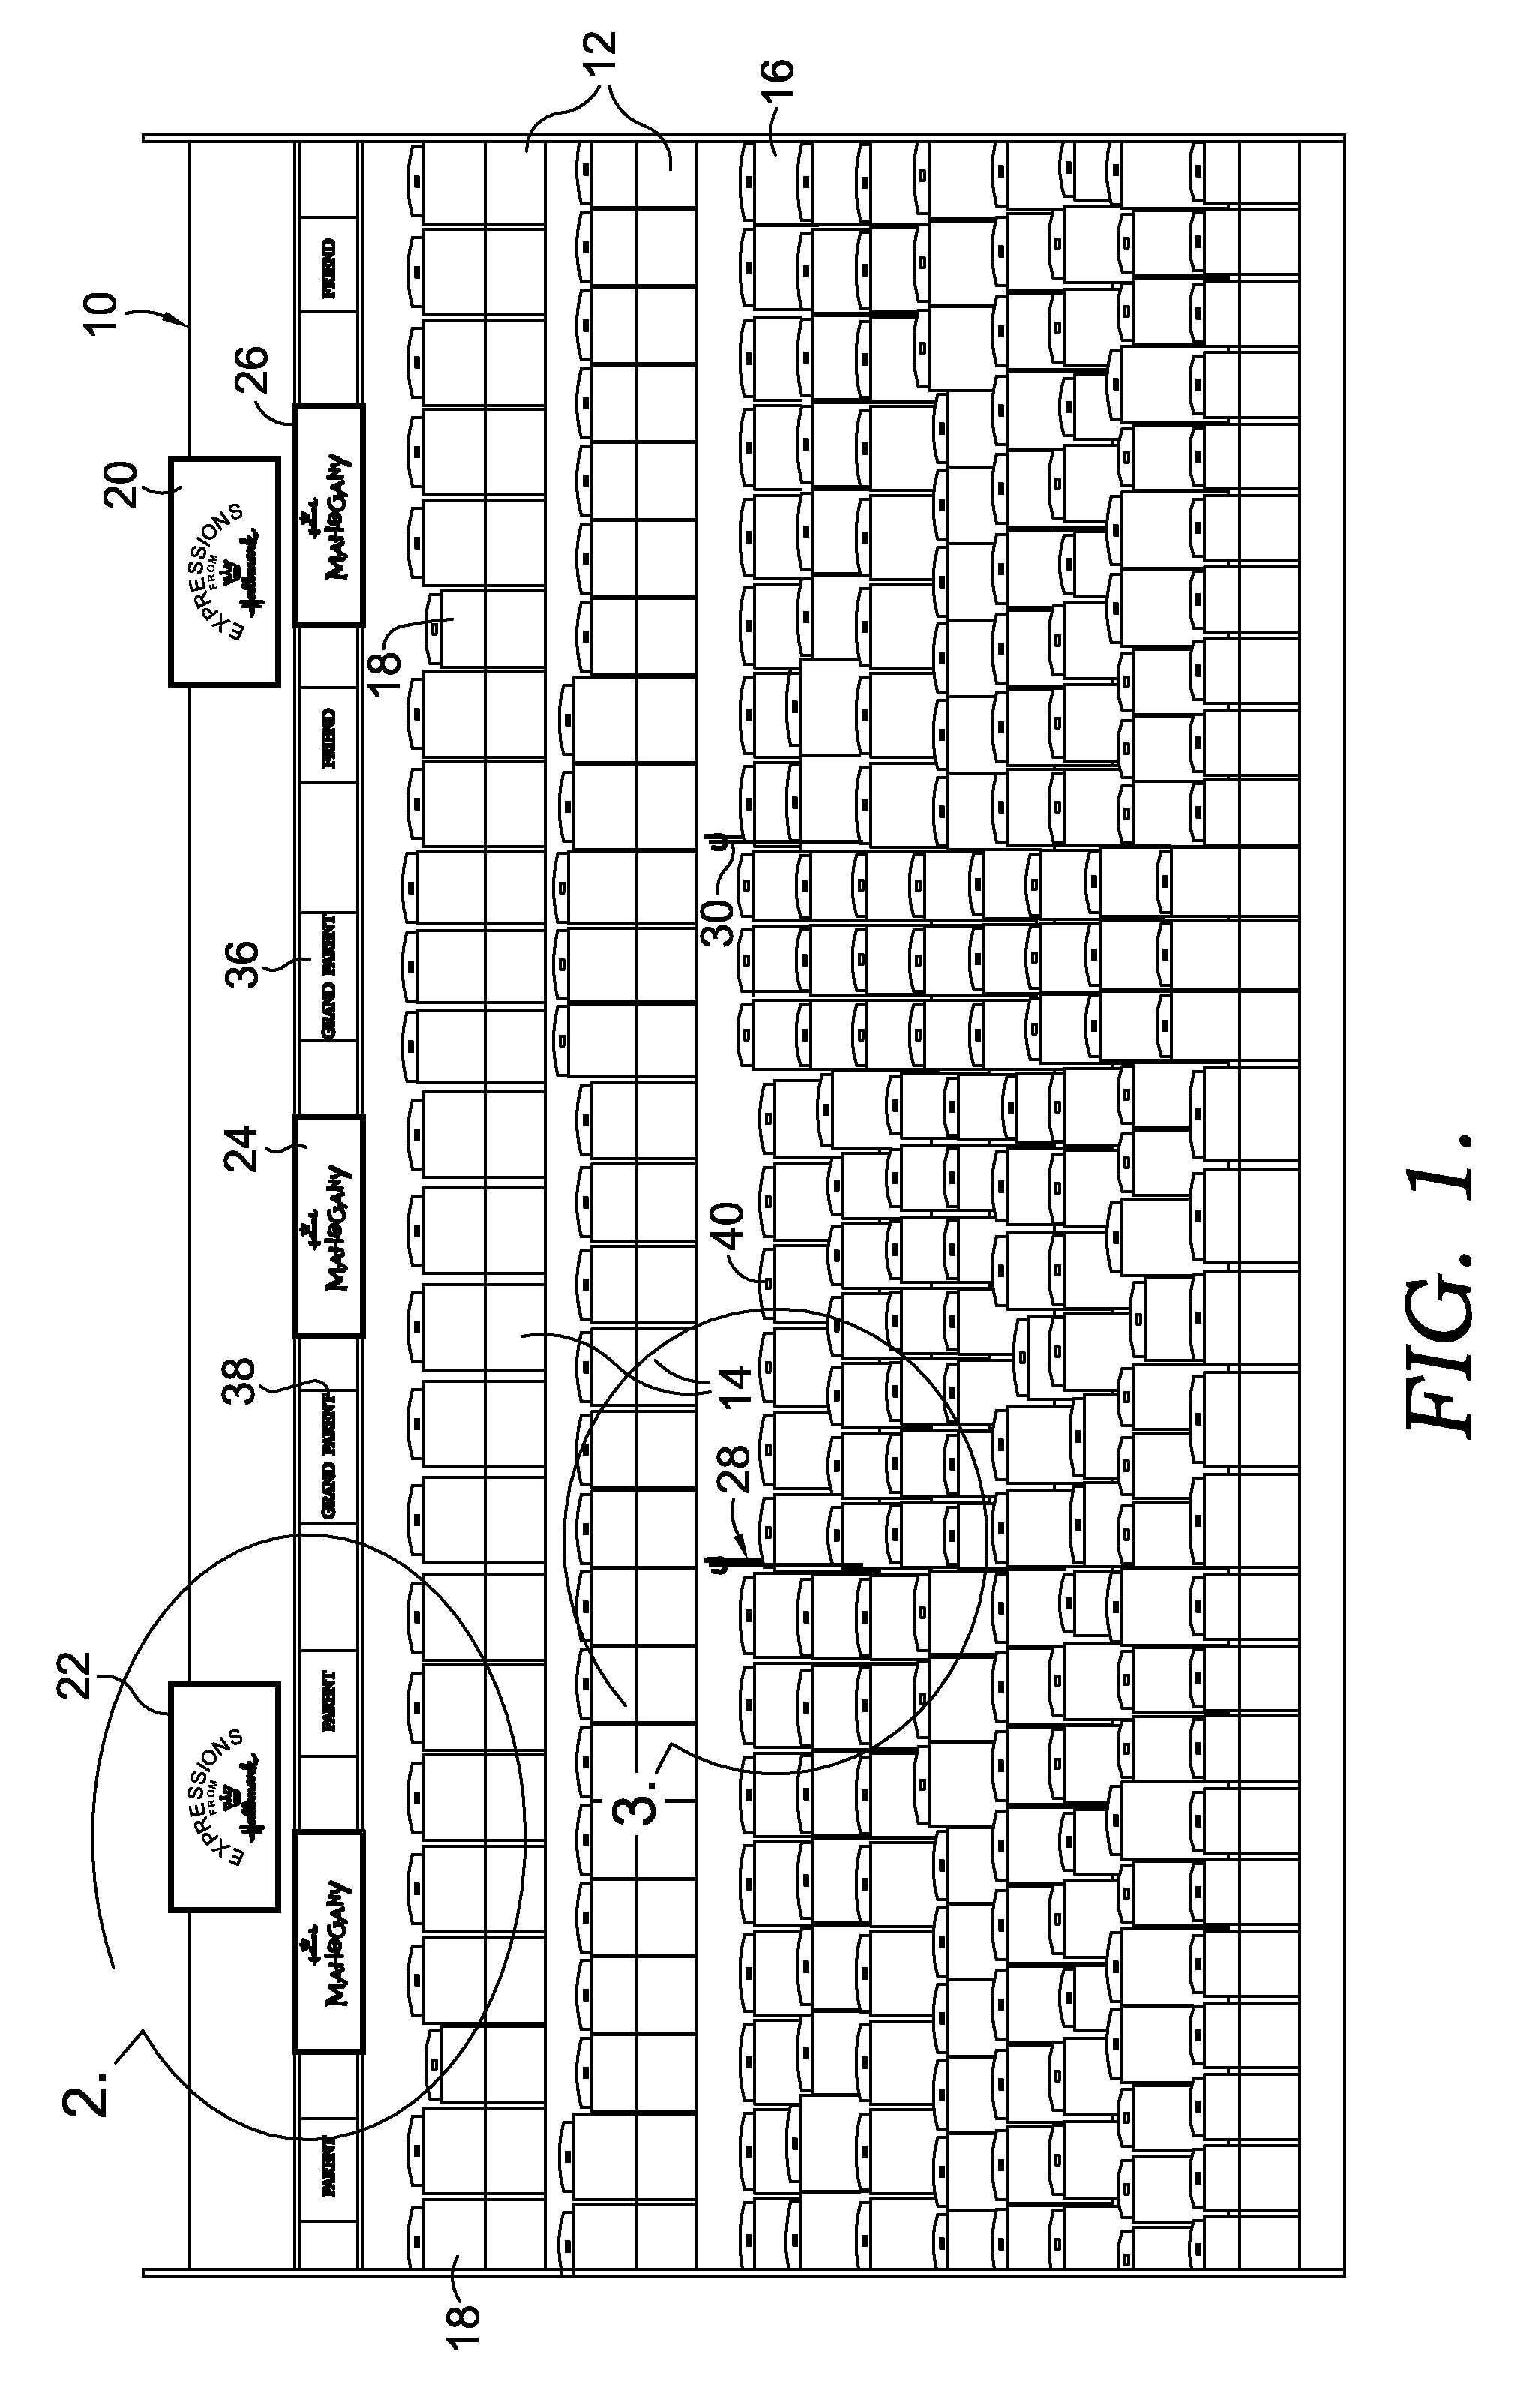 Method of and apparatus for displaying merchandise